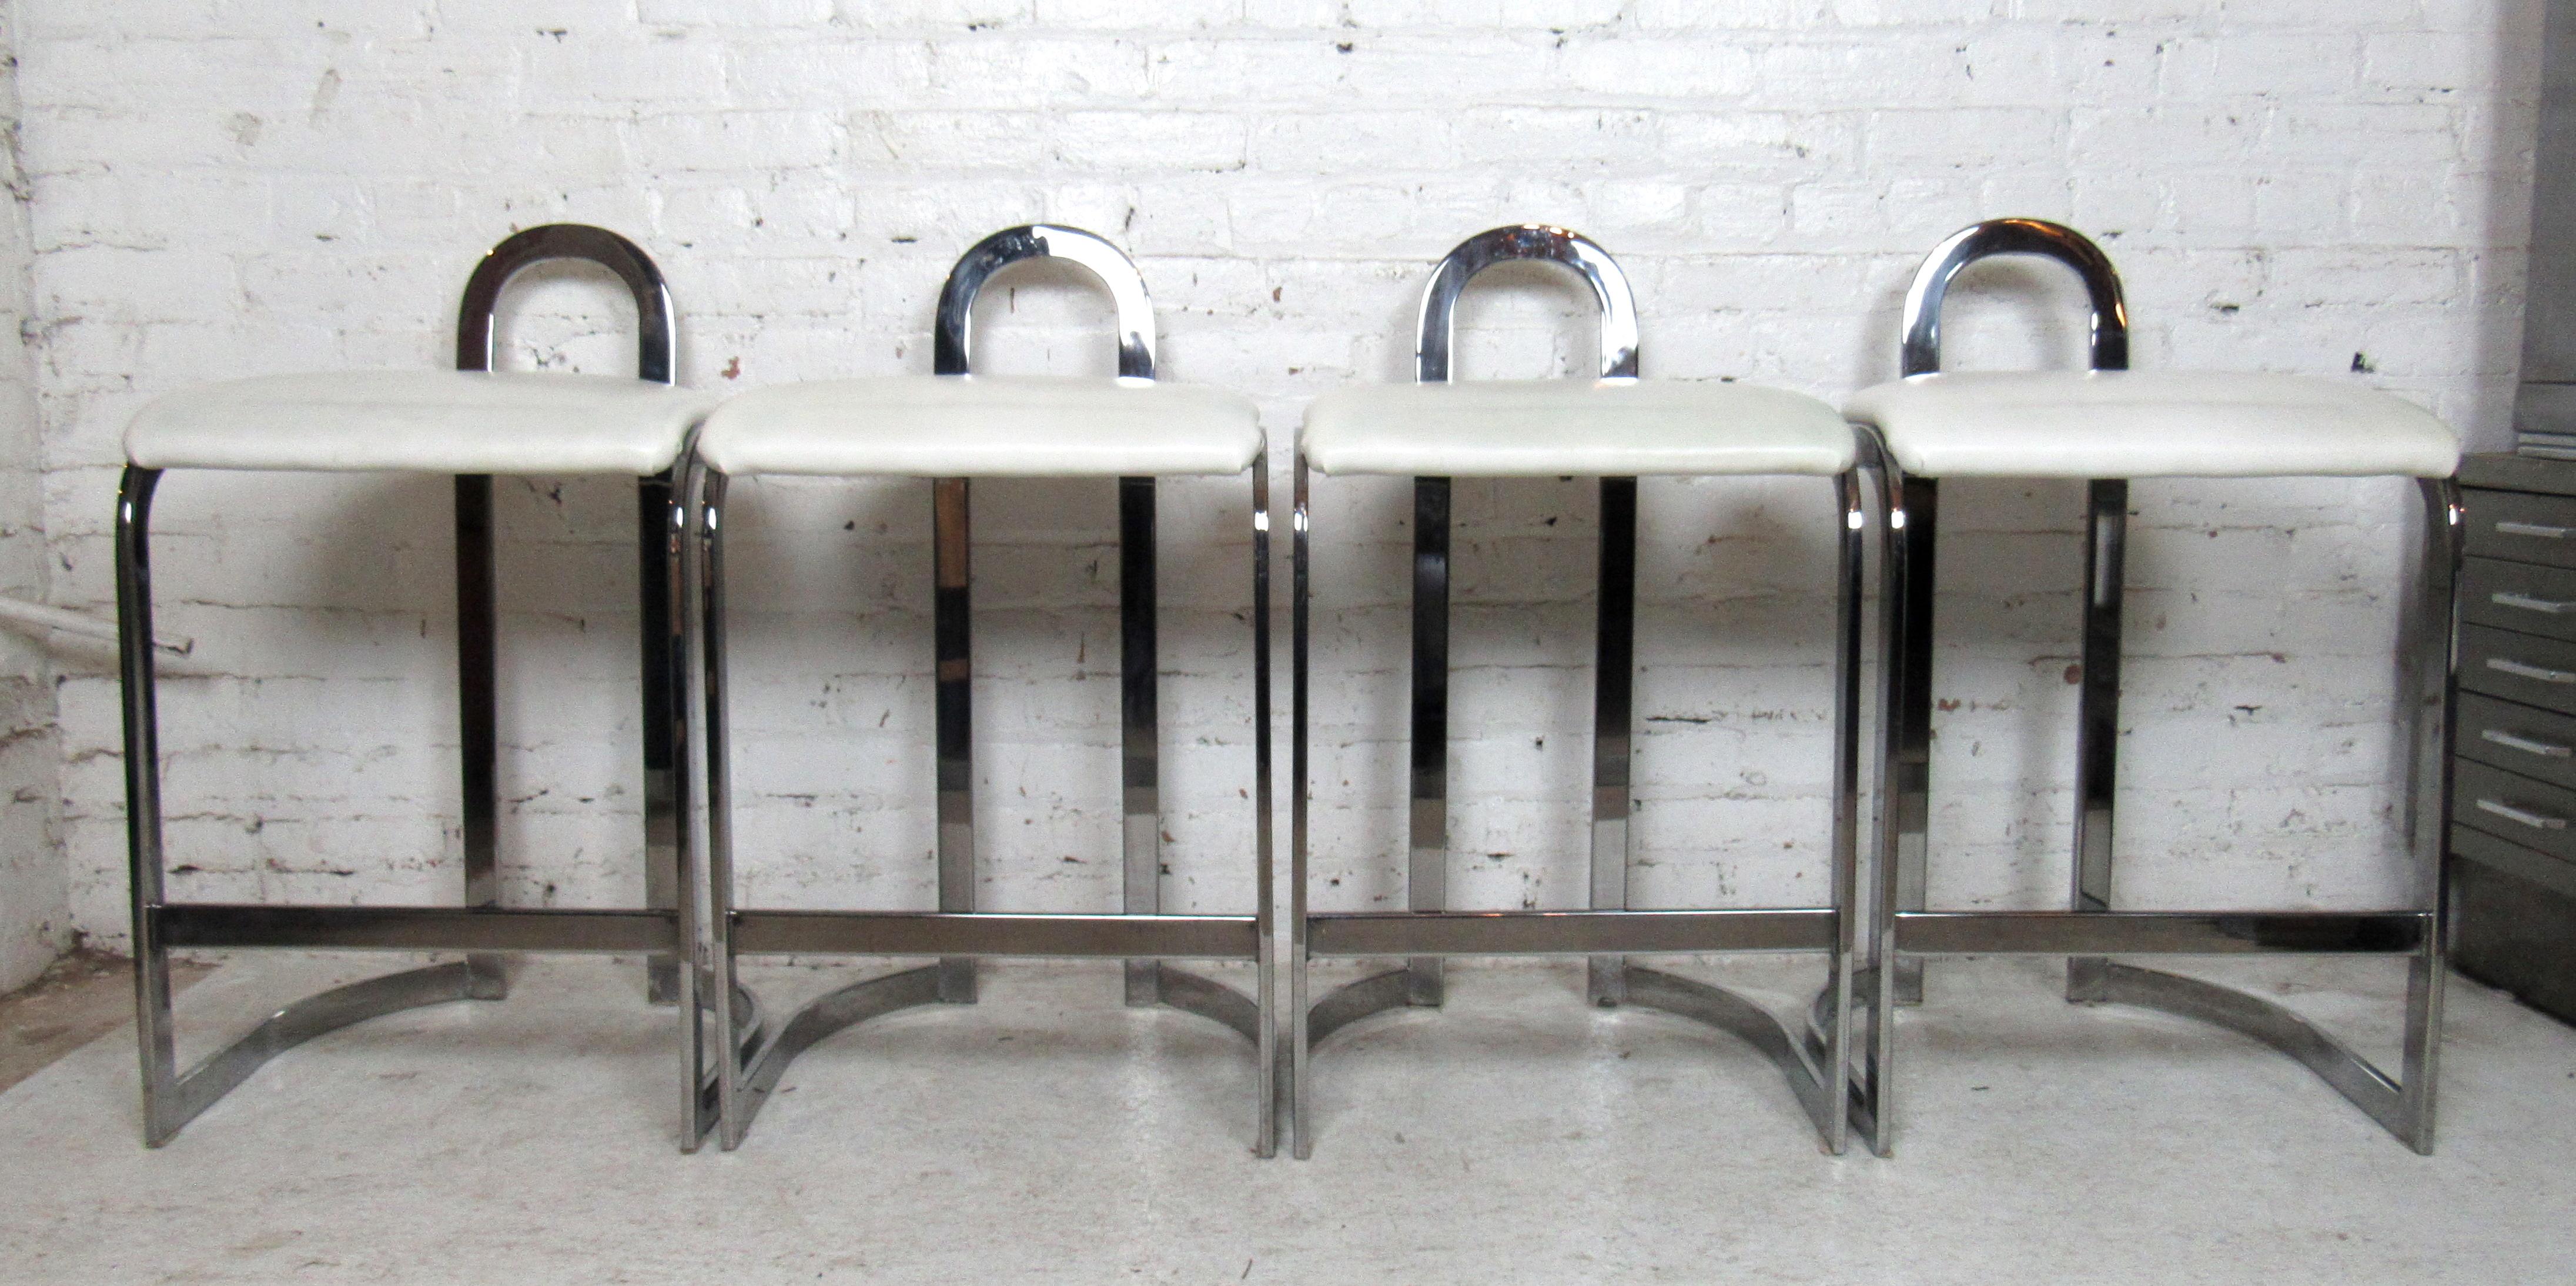 Set of four vintage modern style chrome counter stools featuring white vinyl seating.

Please confirm item location with dealer (NJ or NY).